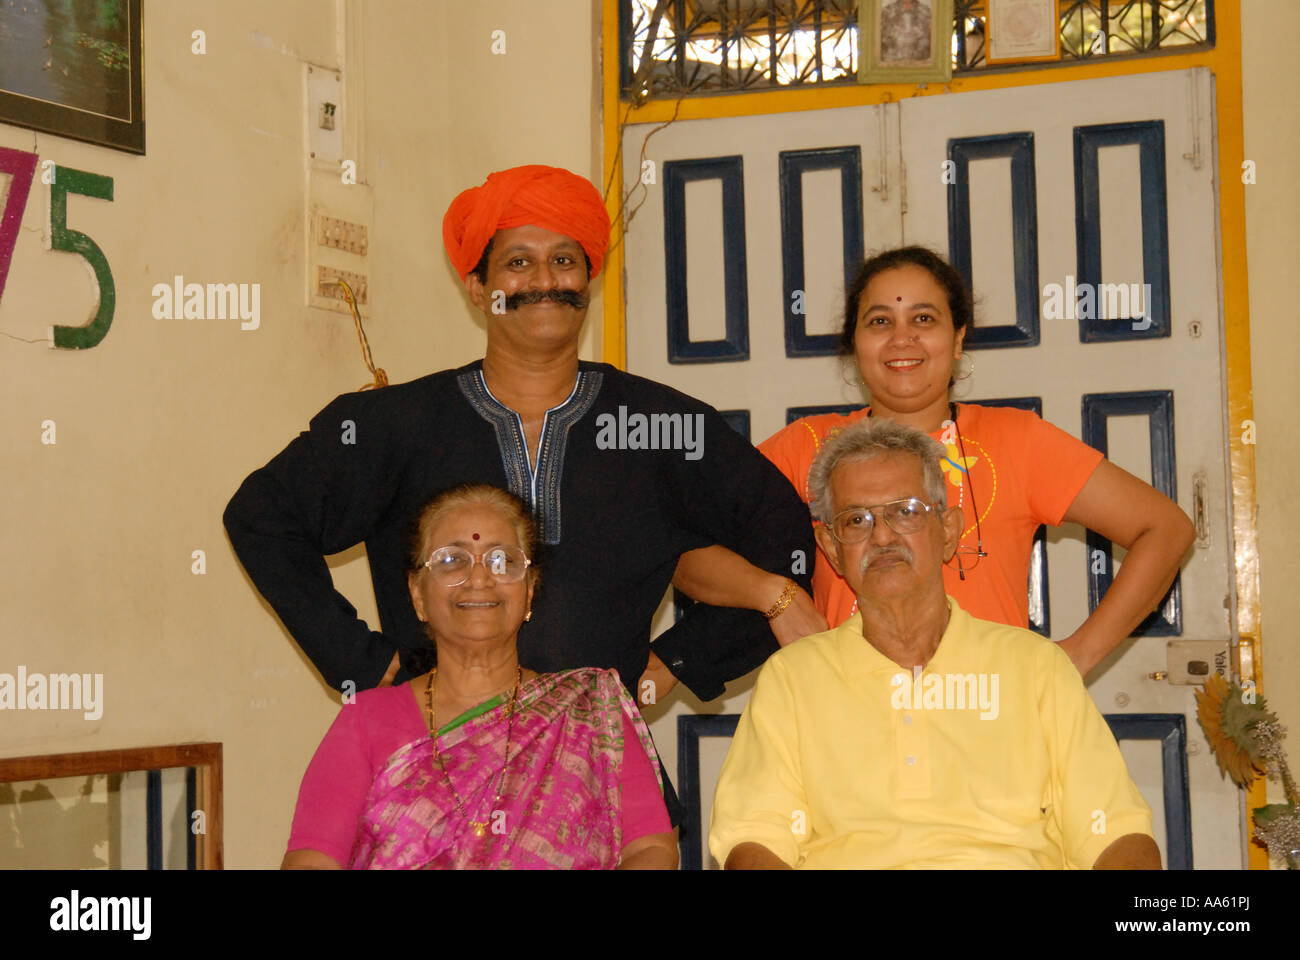 Indian family father mother son daughter - Model Released Stock Photo